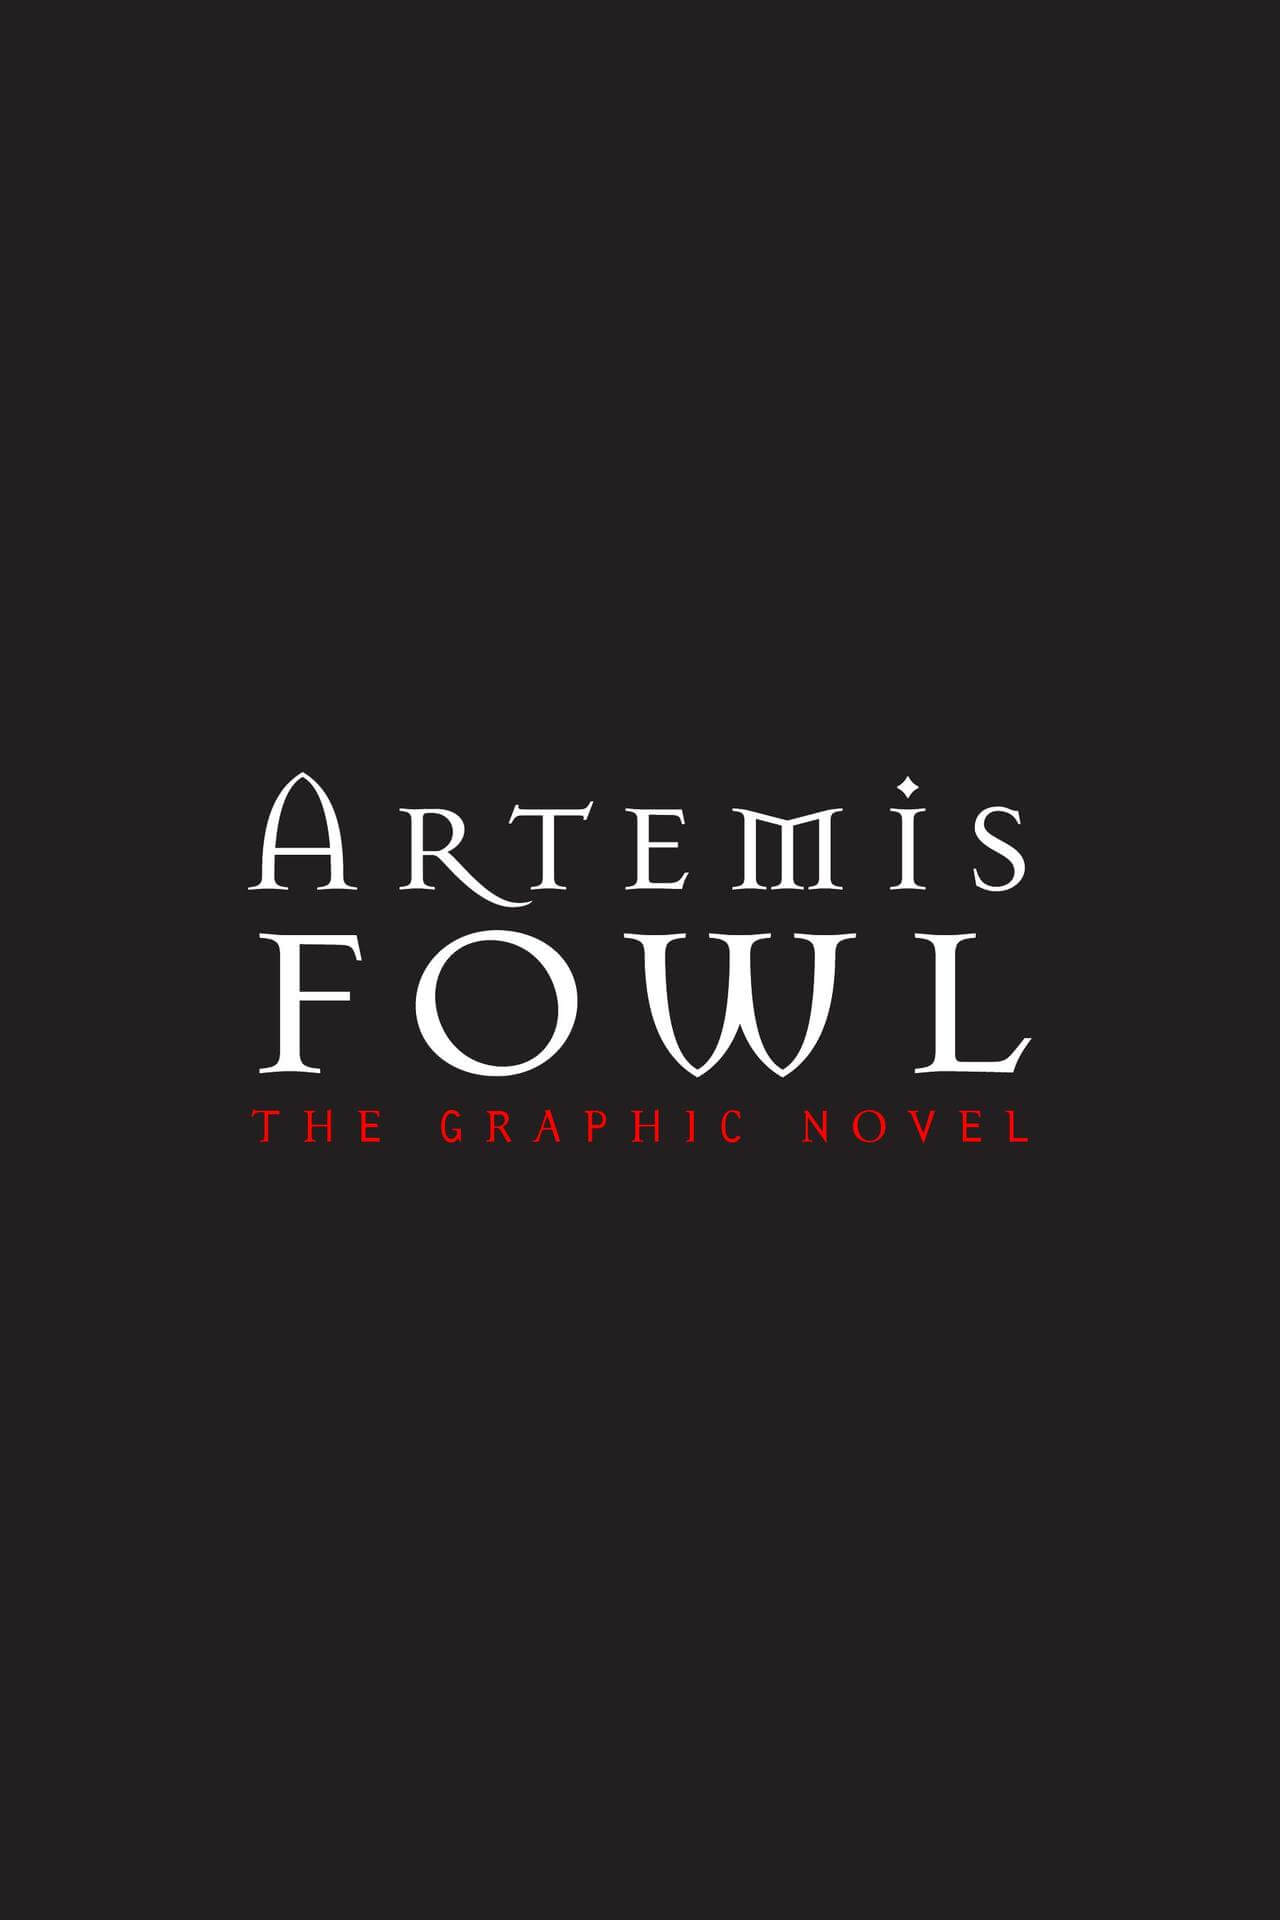 page 111 of artemis fowl the graphic novel